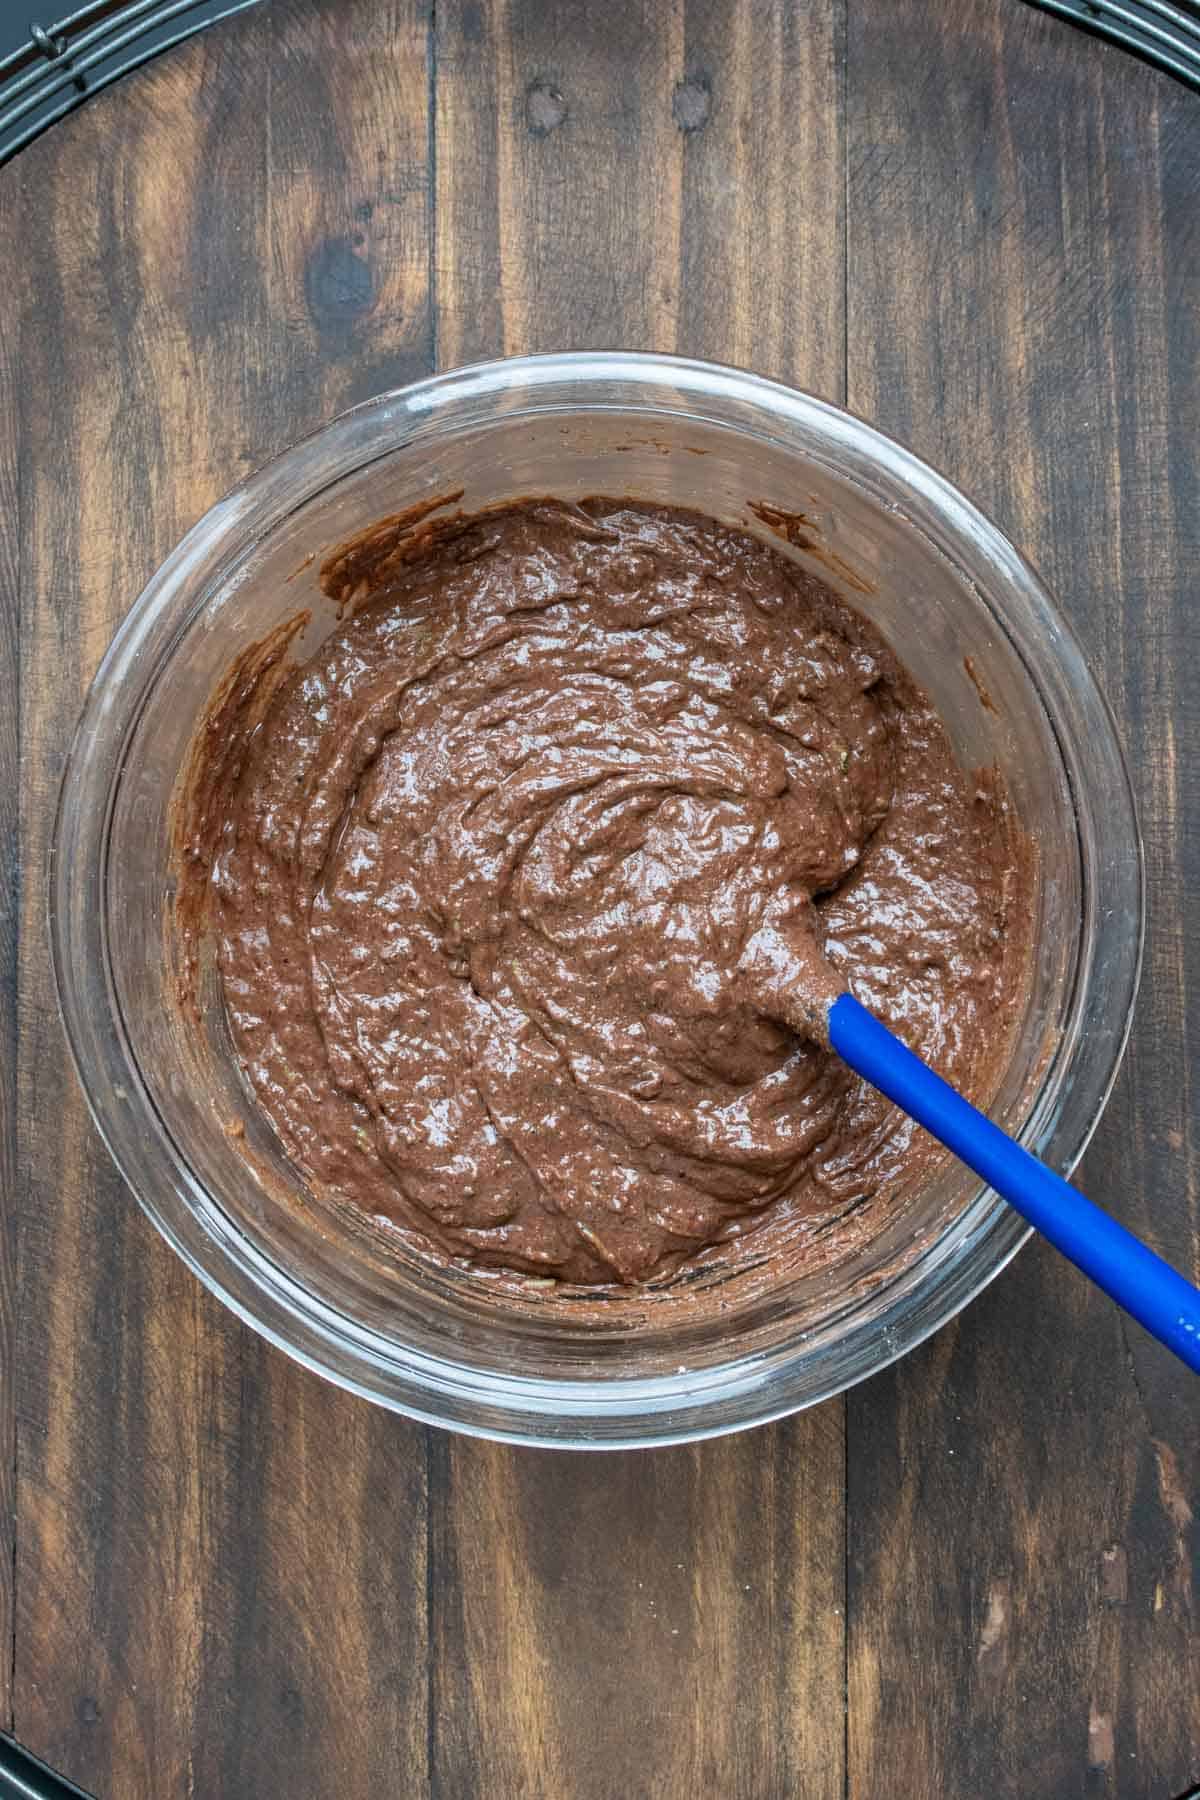 Top view of glass bowl filled with chocolate cake batter